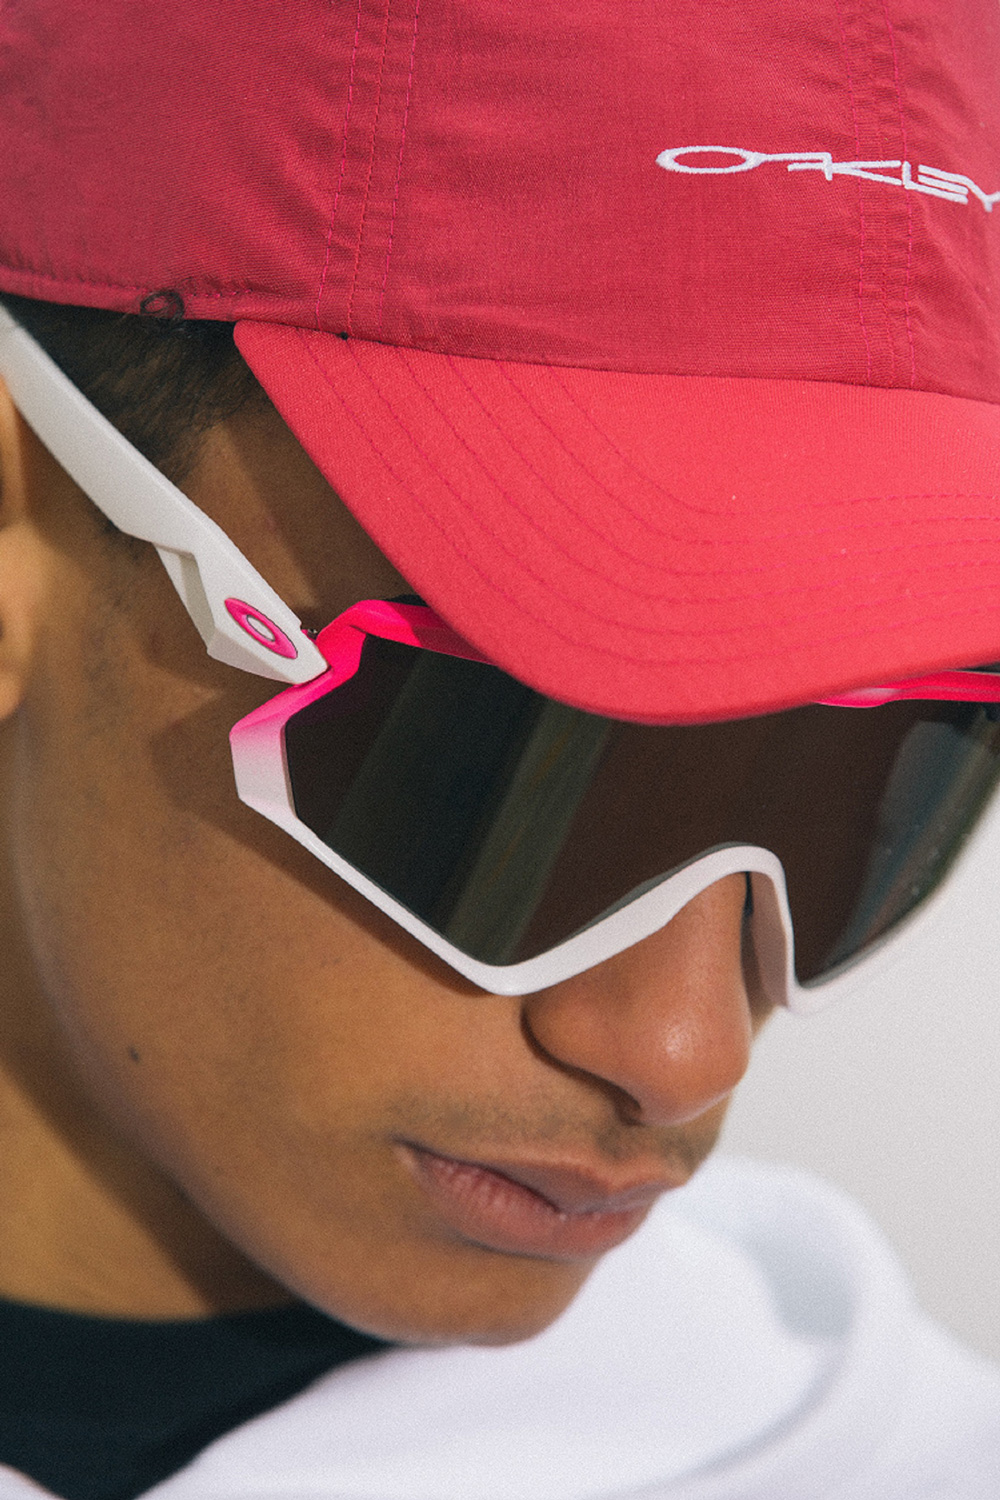 OAKLEY DEFINITION COLLECTION LIFESTYLE IMAGE (8)